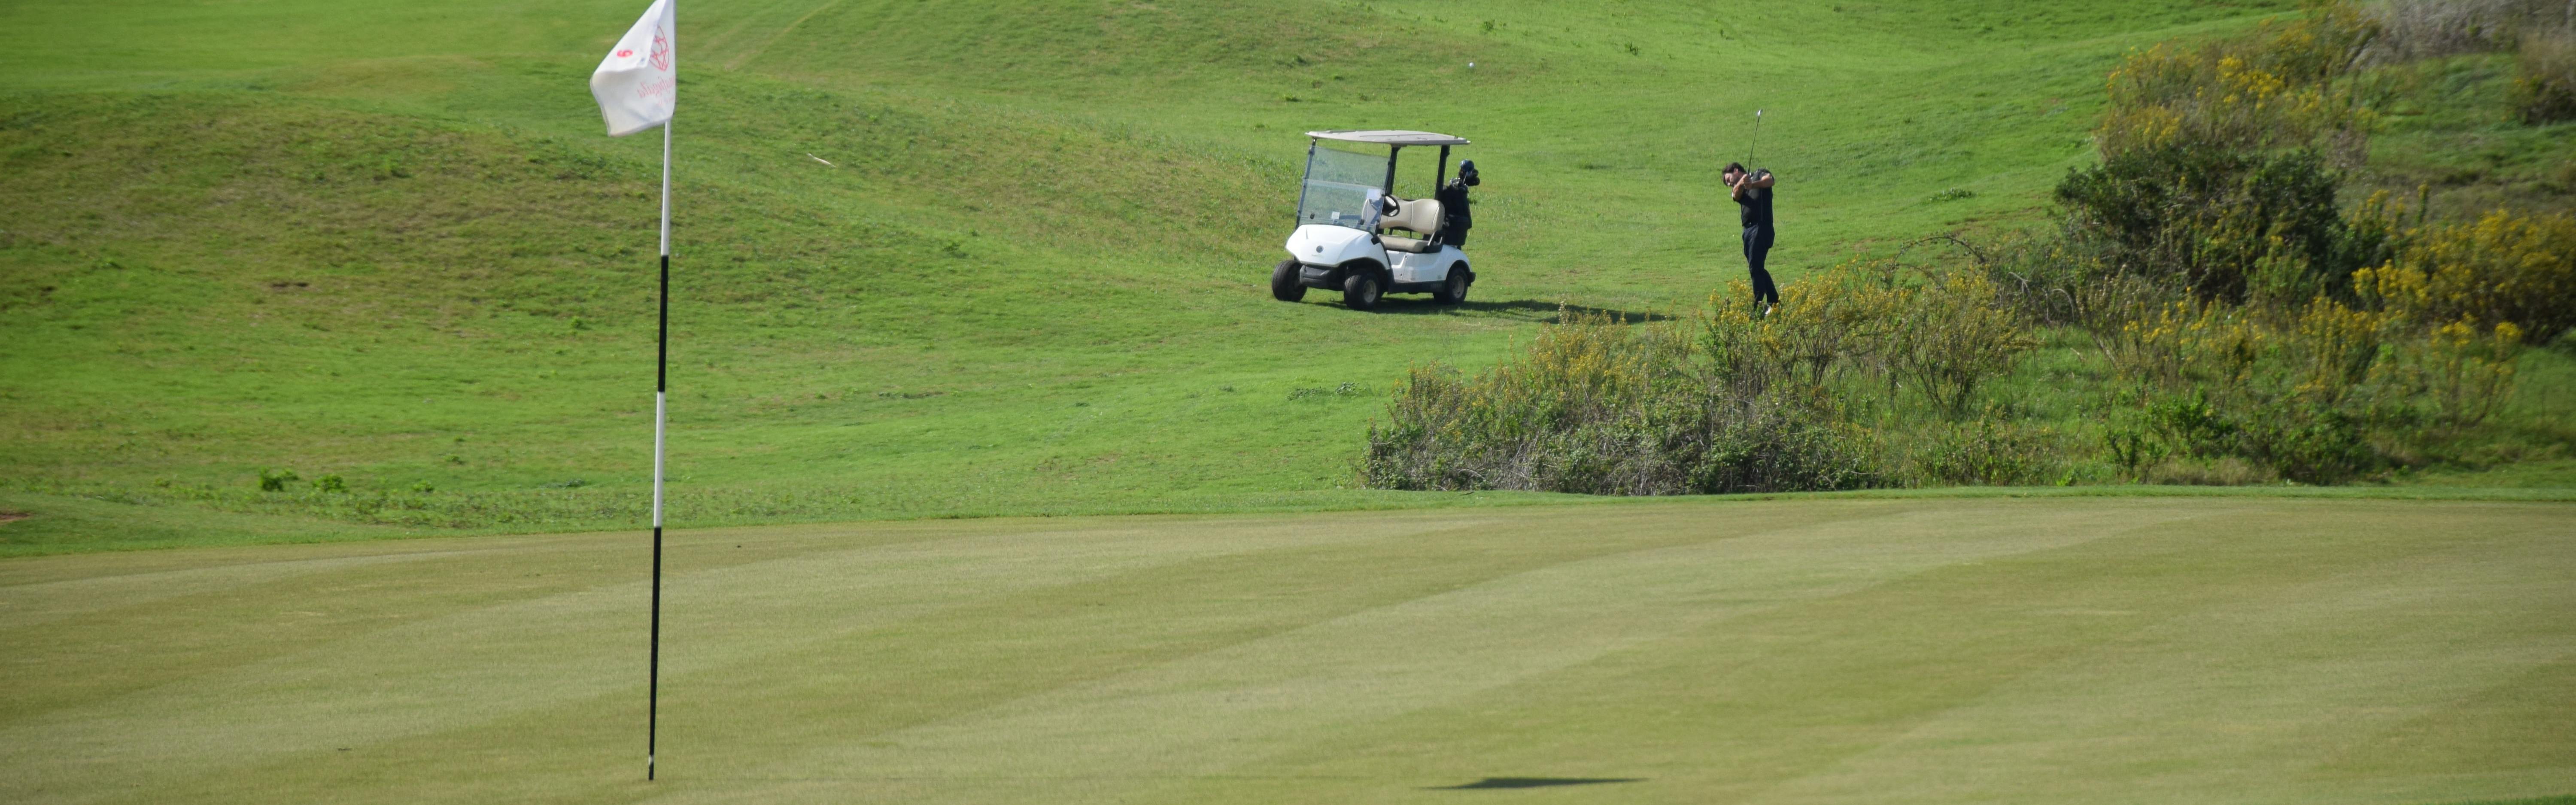 A golfer takes a swing towards the pin. His golf cart is behind him.